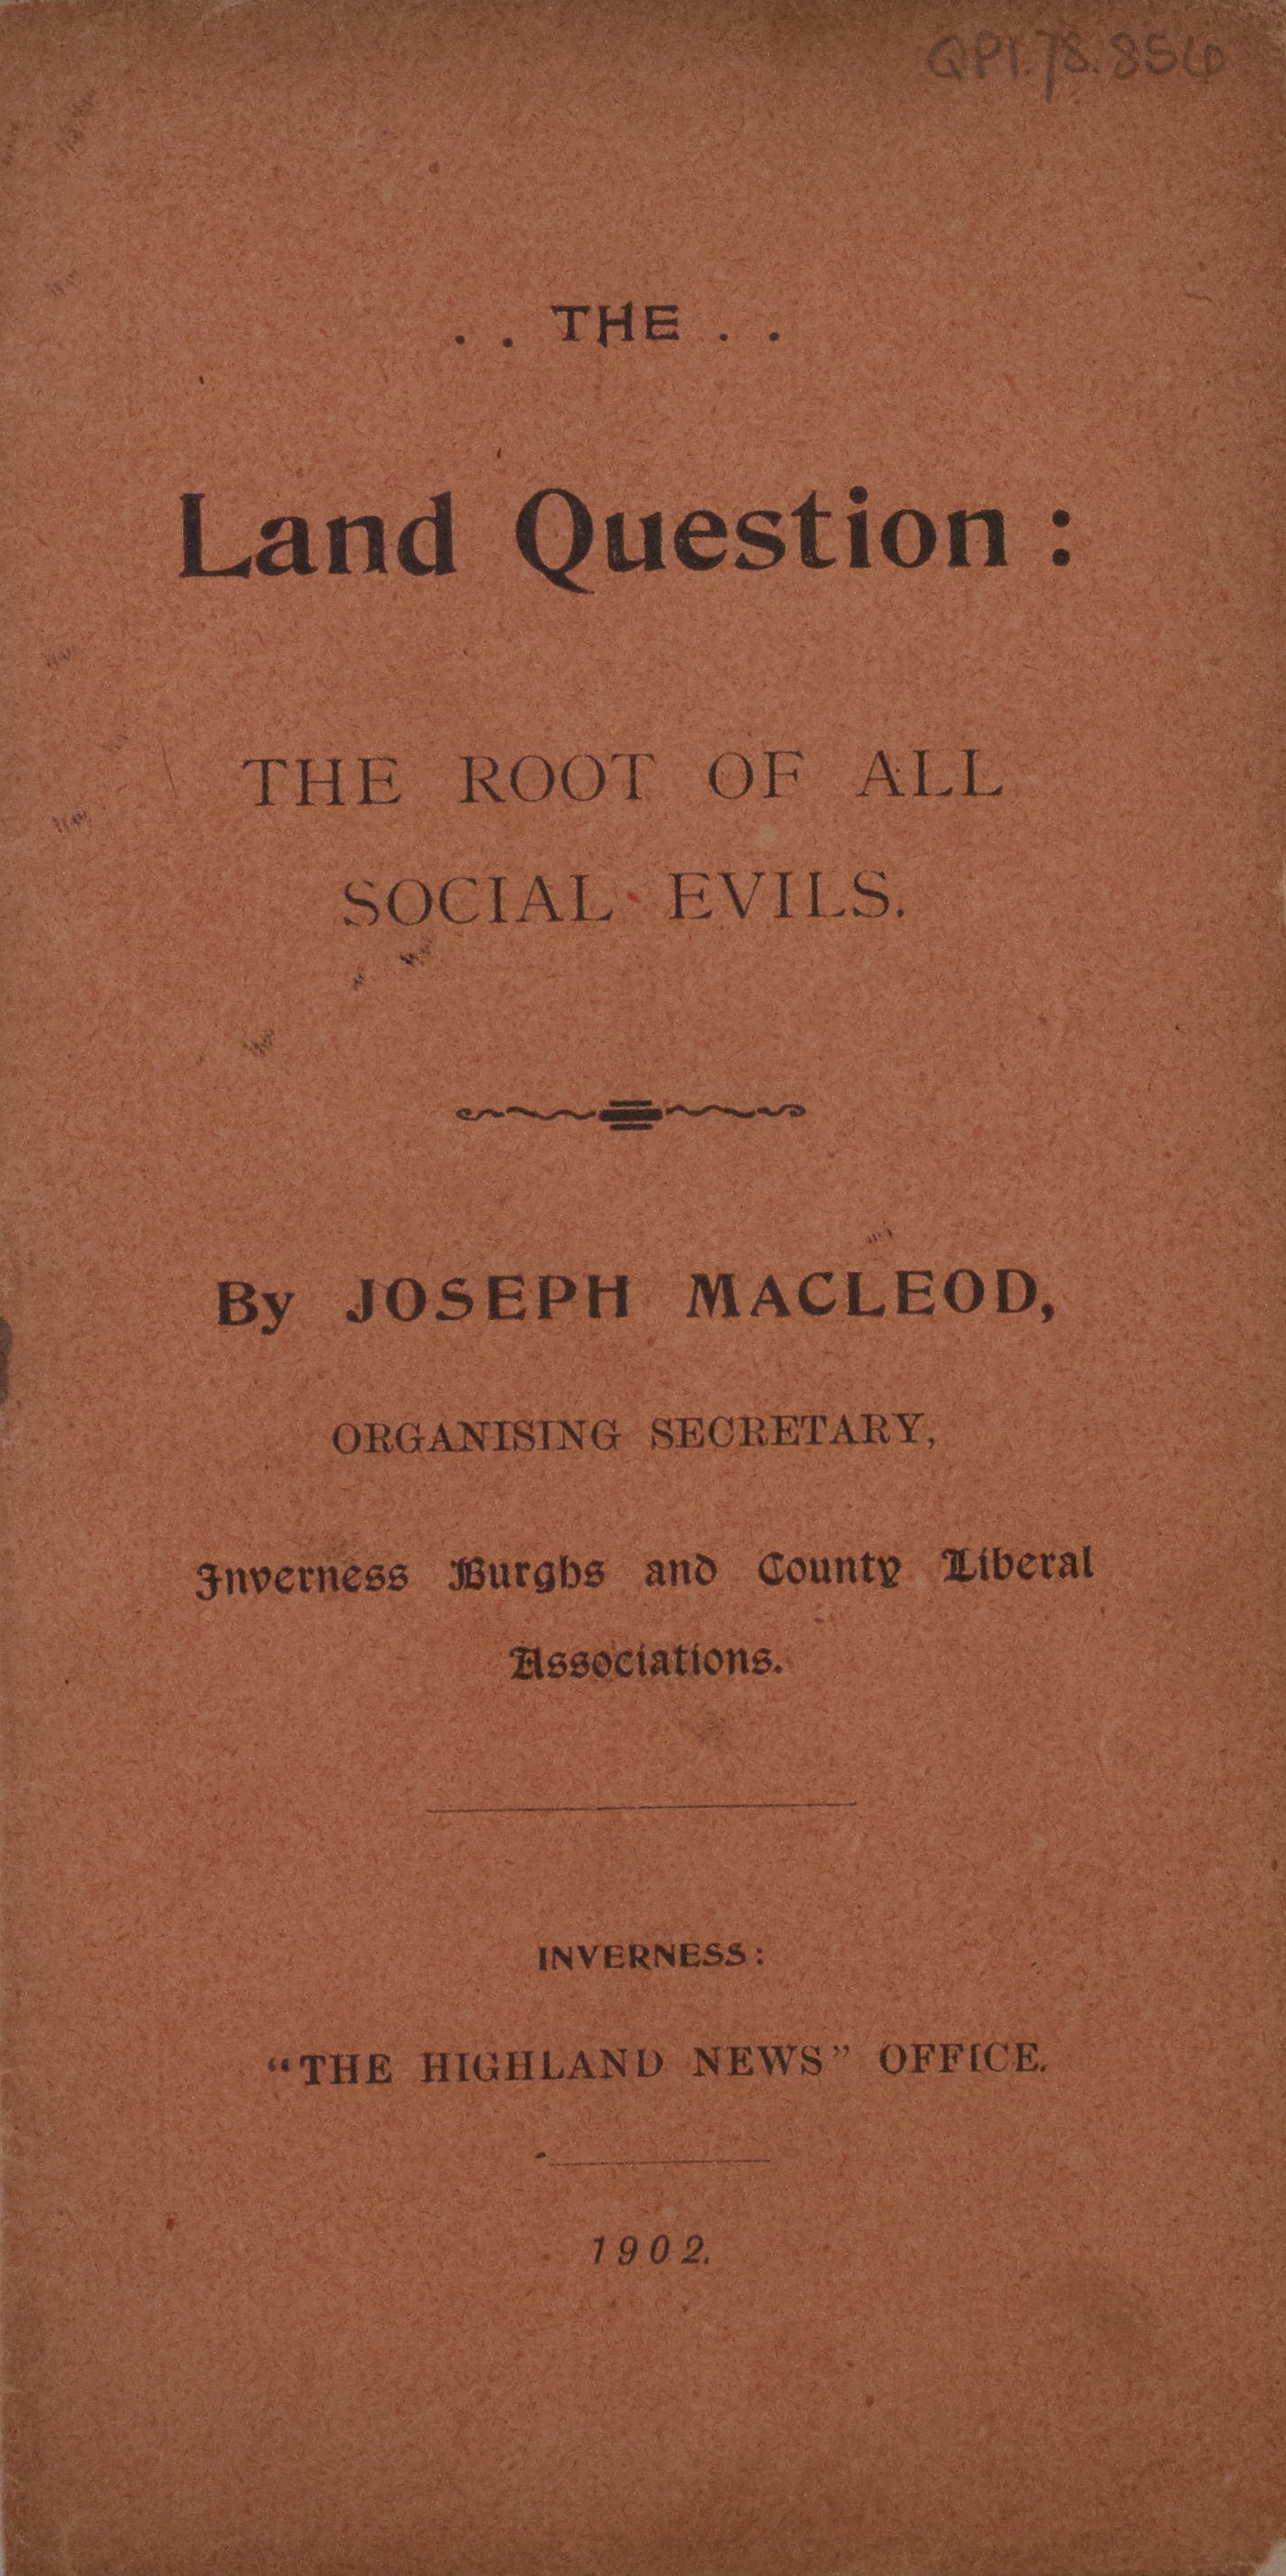 Front page of pamphlet